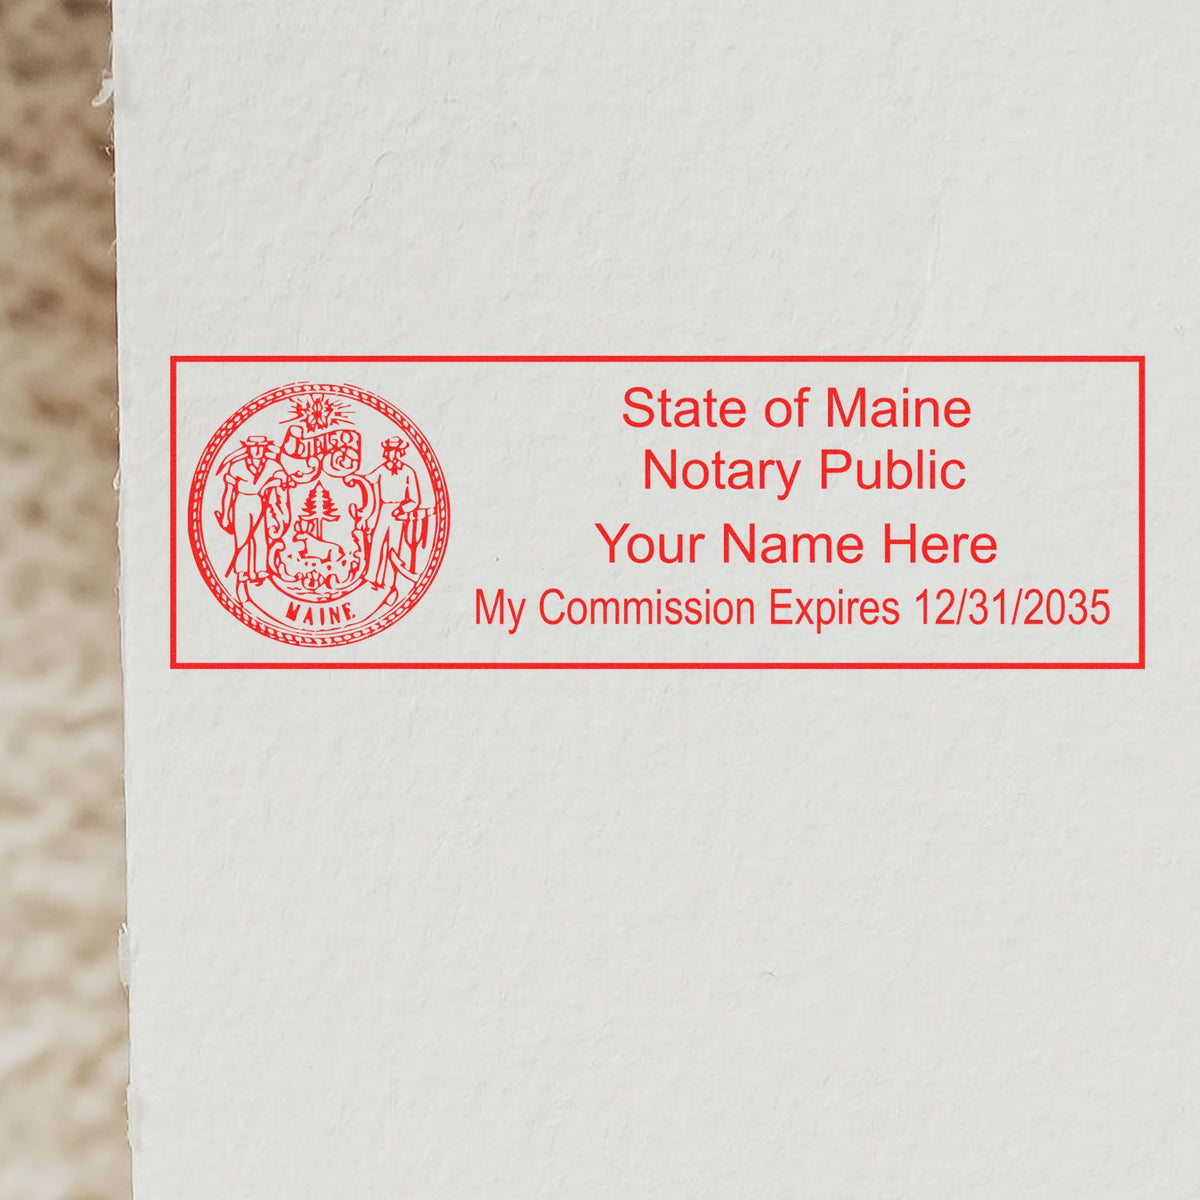 An alternative view of the MaxLight Premium Pre-Inked Maine State Seal Notarial Stamp stamped on a sheet of paper showing the image in use